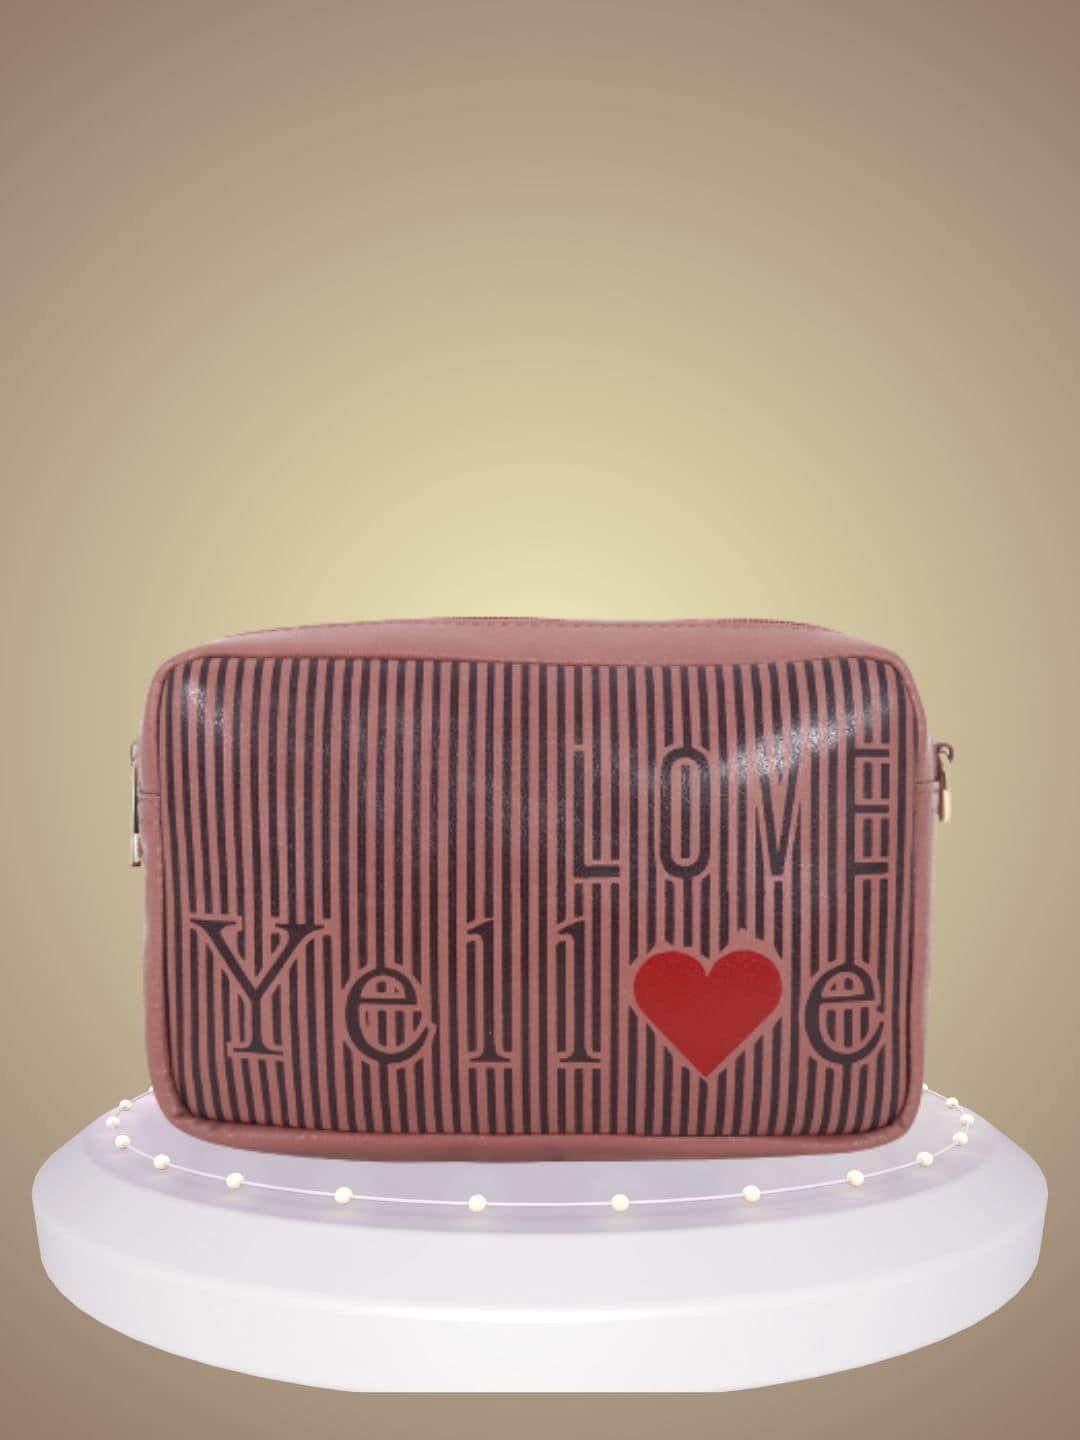 yelloe striped structured sling bag